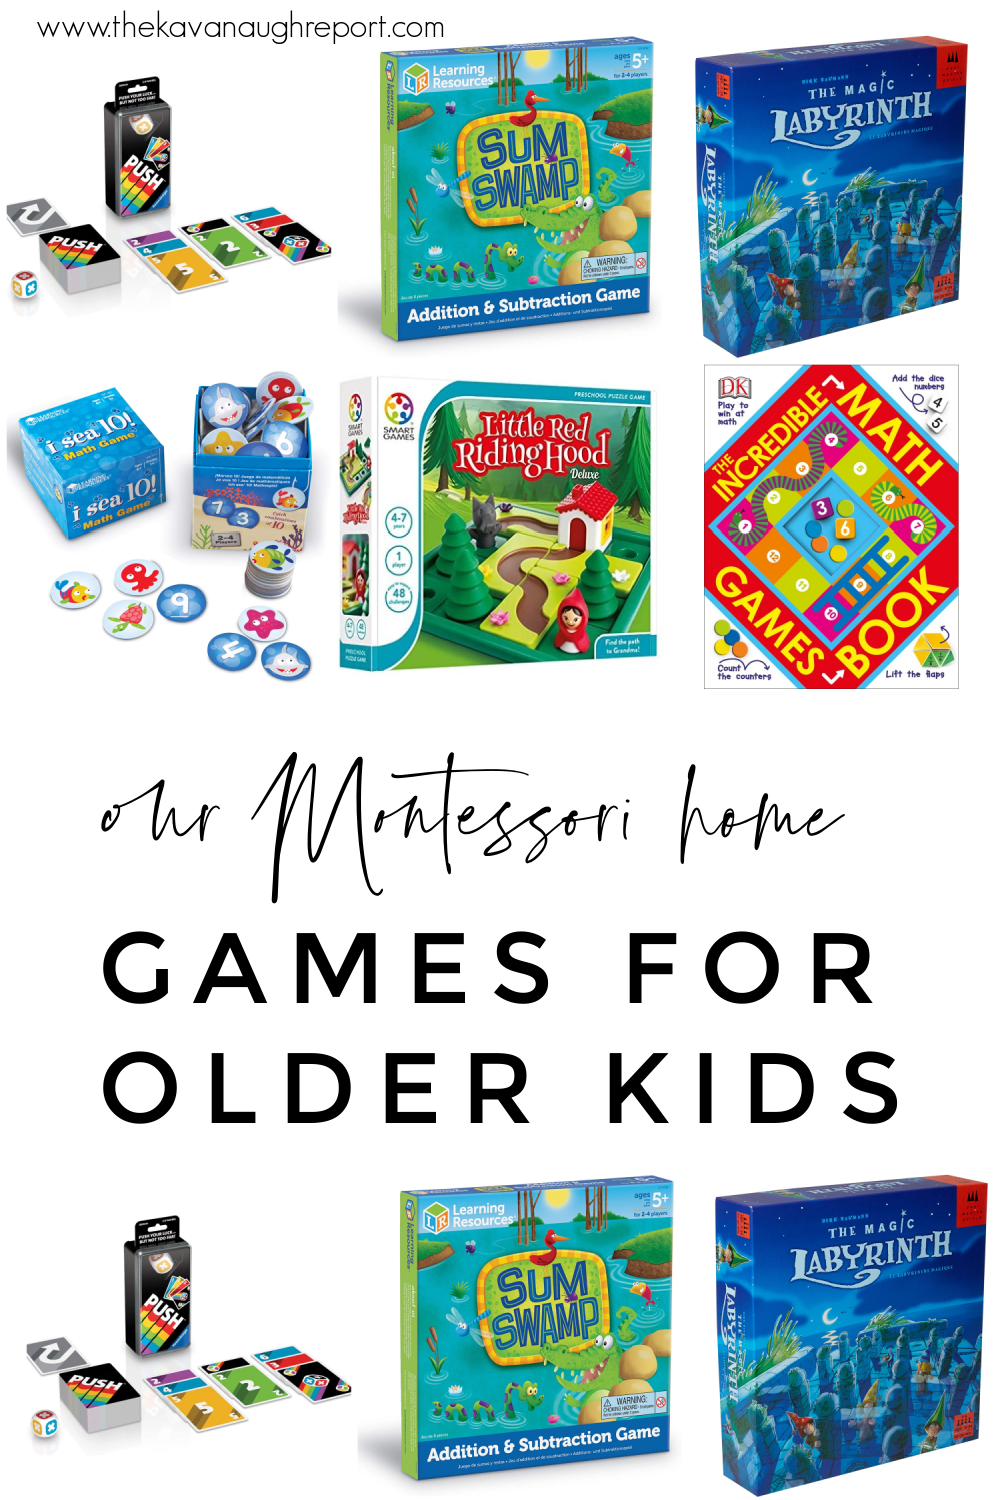 Montessori friendly board games for children ages 5 to 10-years-old. Many of these support academic learning in fun and interesting ways.